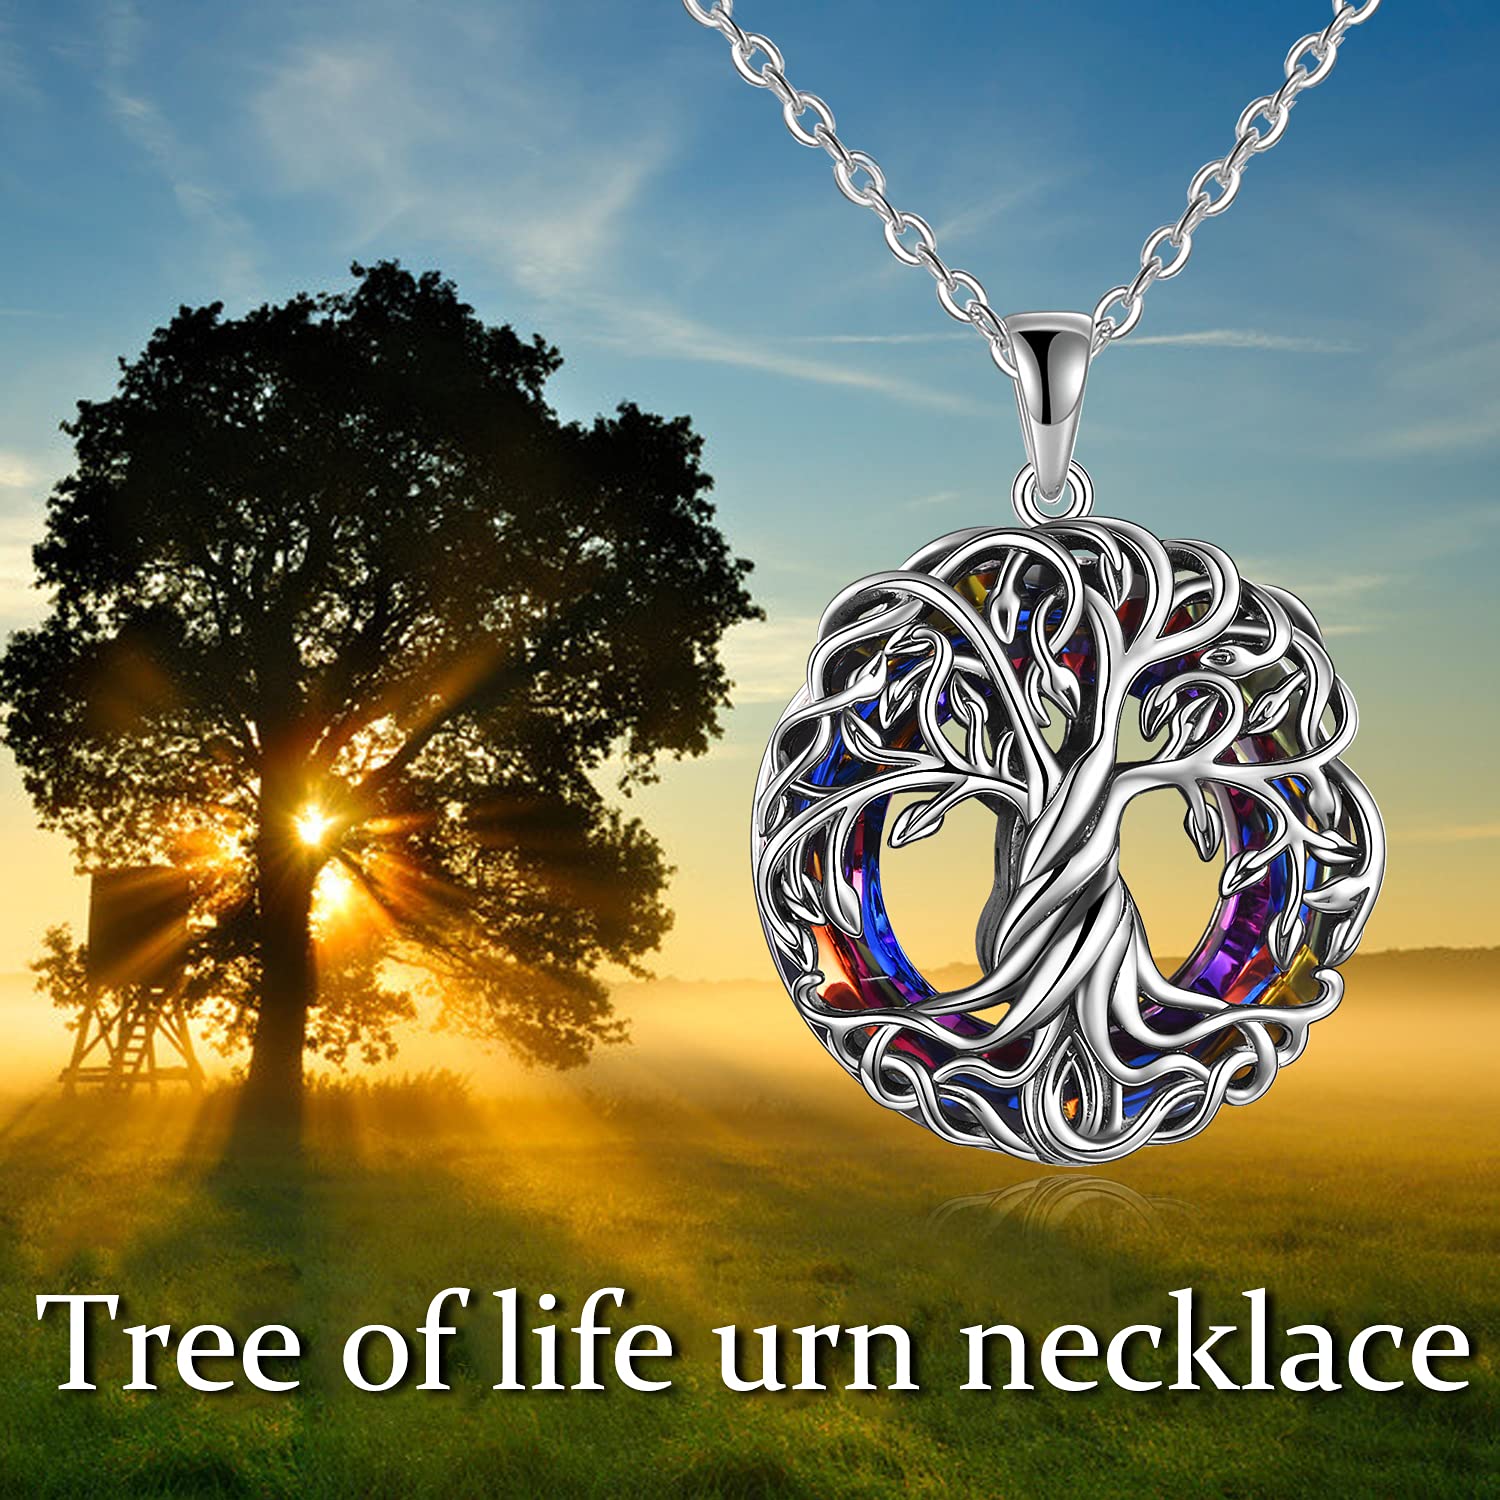 TOUPOP Cremation Jewelry s925 Sterling Silver Tree of Life Urn Necklace Keepsake Ashes Hair Memorial Locket with Circle Crystal w/Funnel Filler for Women Girls Friends